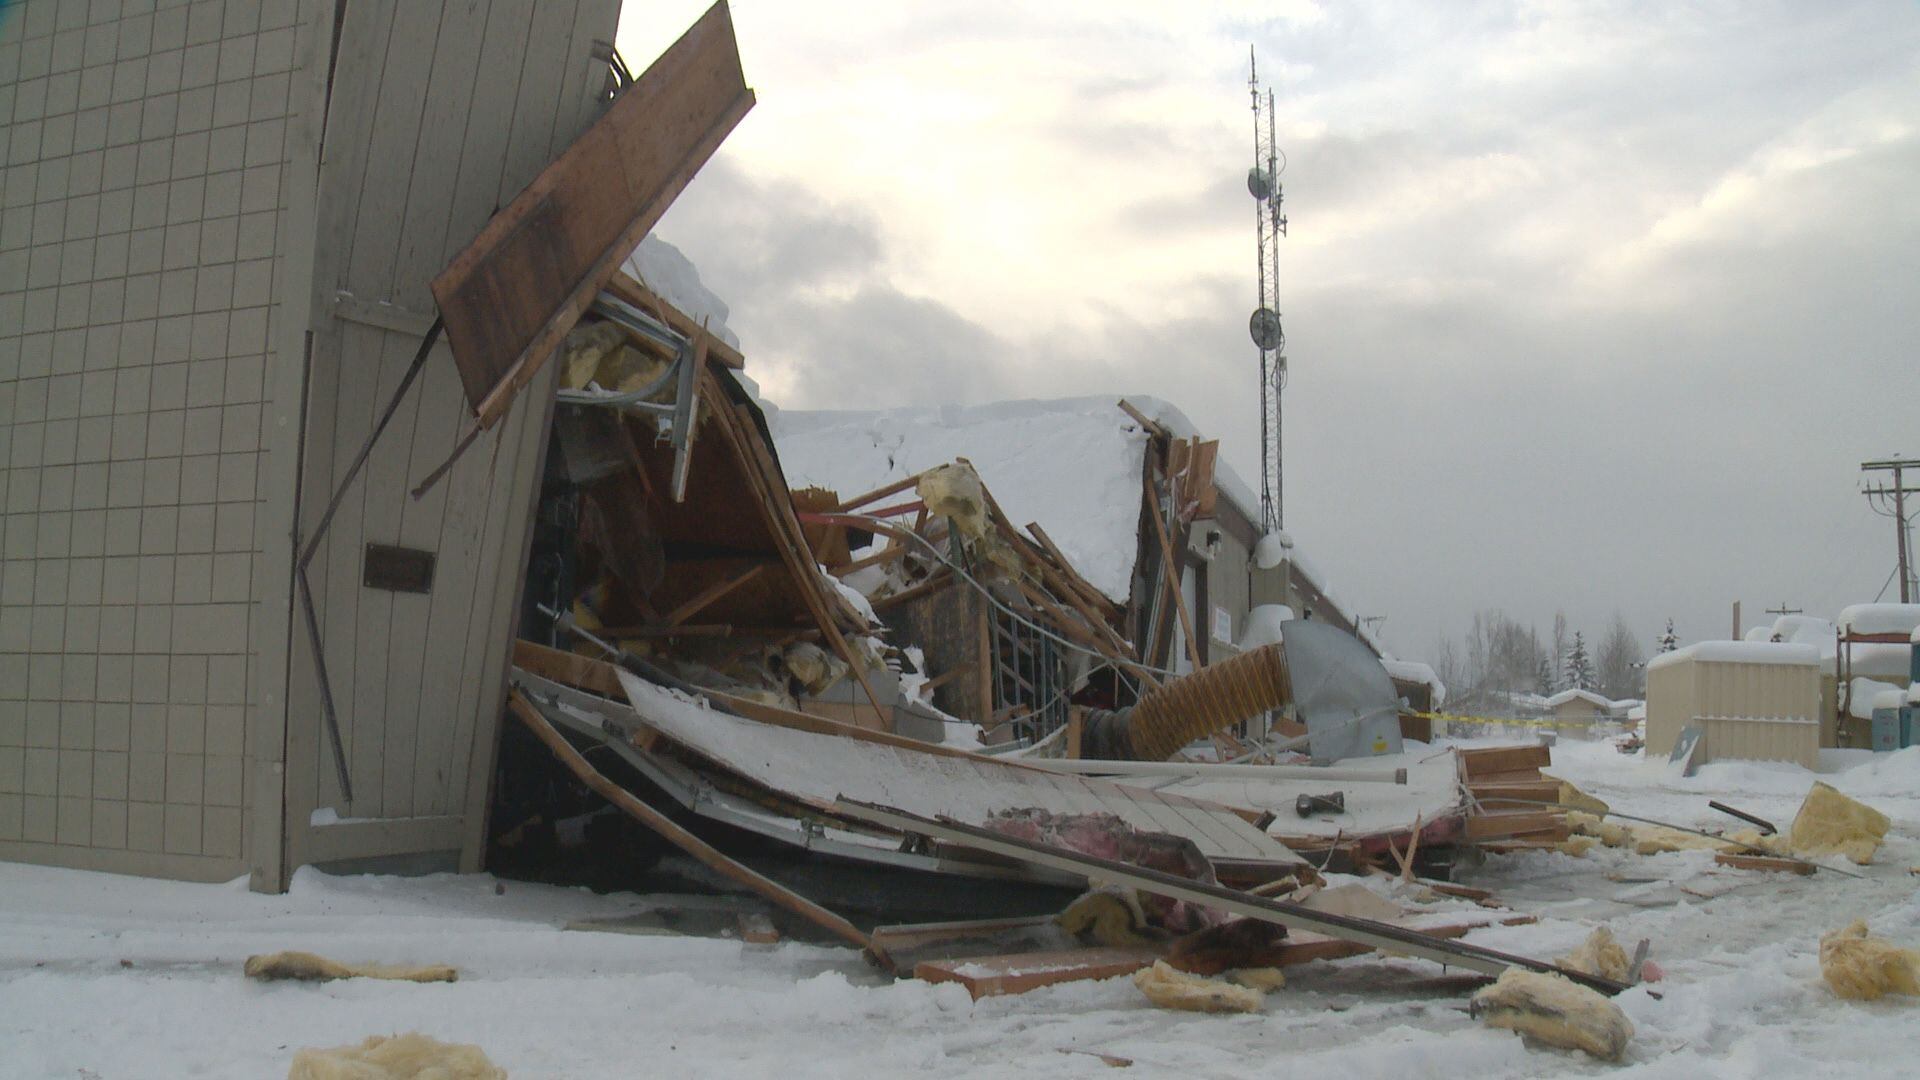 A roof collapse on Sunday off East Dowling Road is the 8th this winter in Anchorage